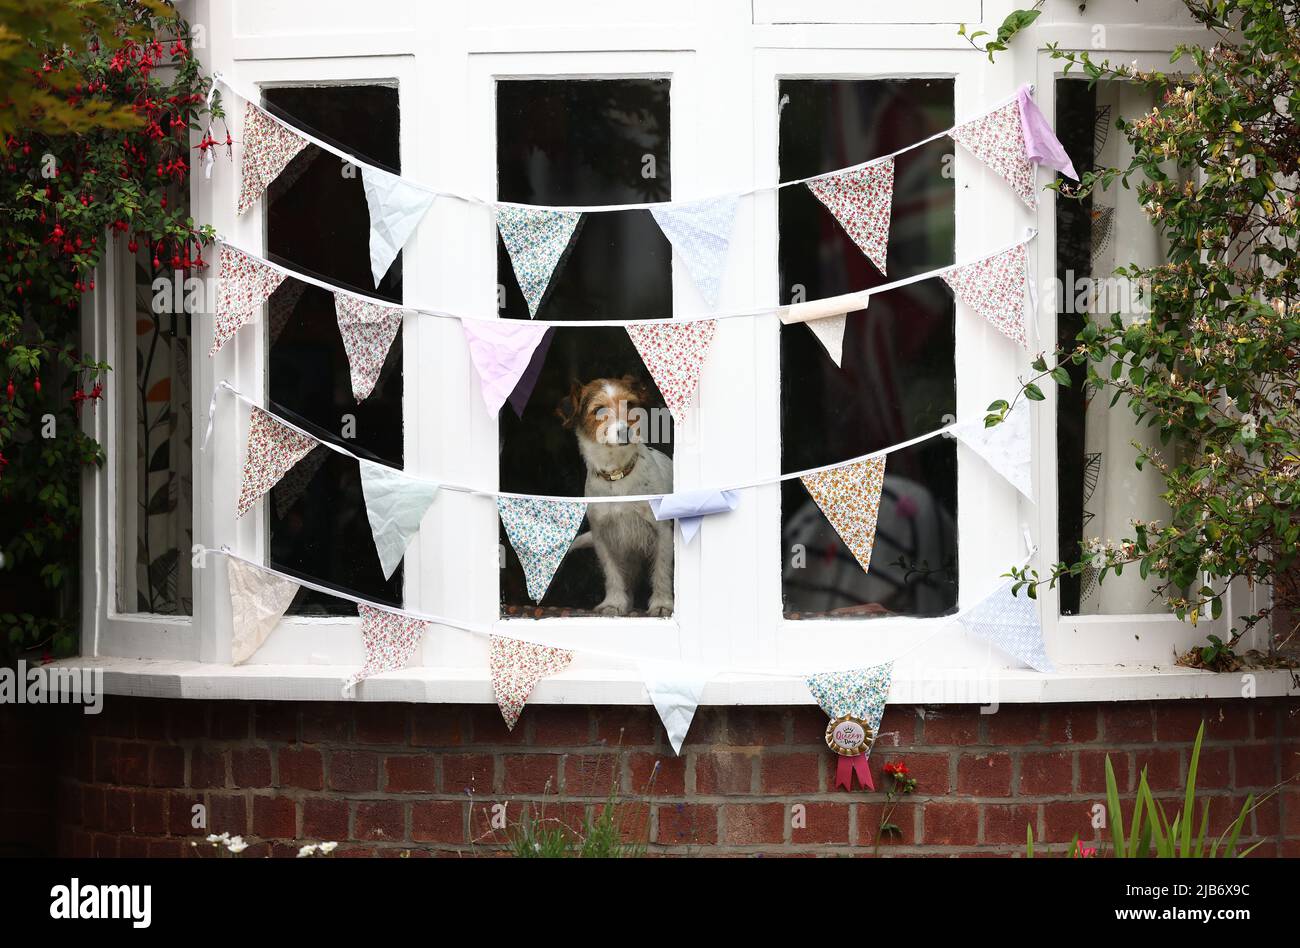 Leicester, Leicestershire, UK. 3rd June 2022.  A dog looks from behind bunting during the Knighton Church Road street party to celebrate the Queen's Platinum Jubilee. Credit Darren Staples/Alamy Live News. Stock Photo